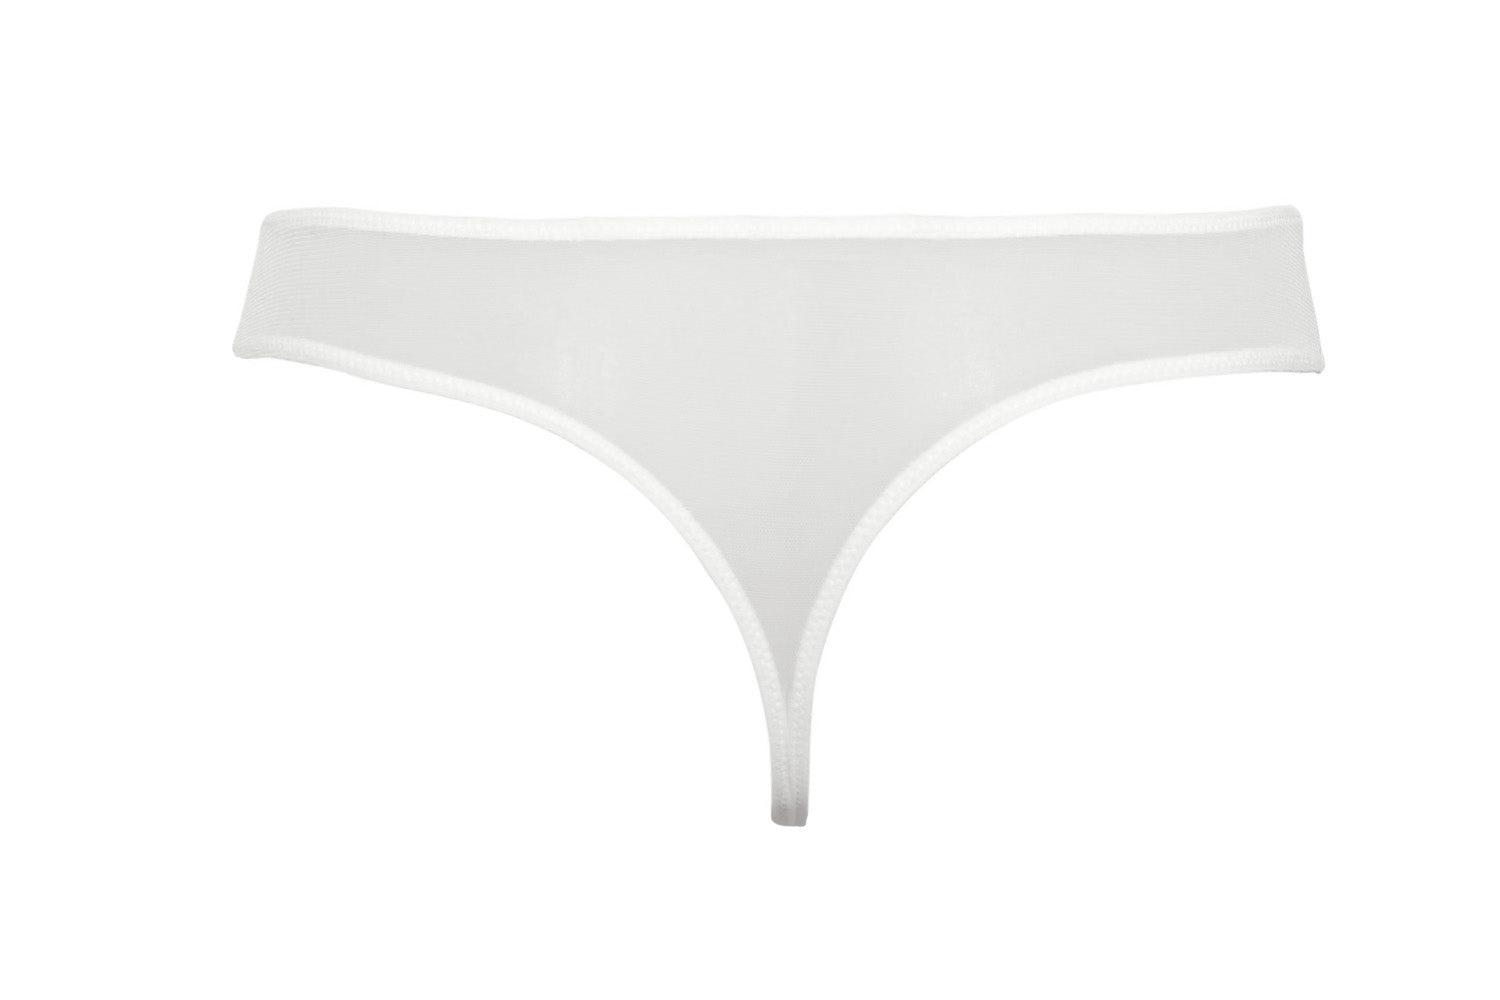 The Gentle Embroidery Tulle Thong from SIELEI Italy provides the perfect balance of comfort and style. 